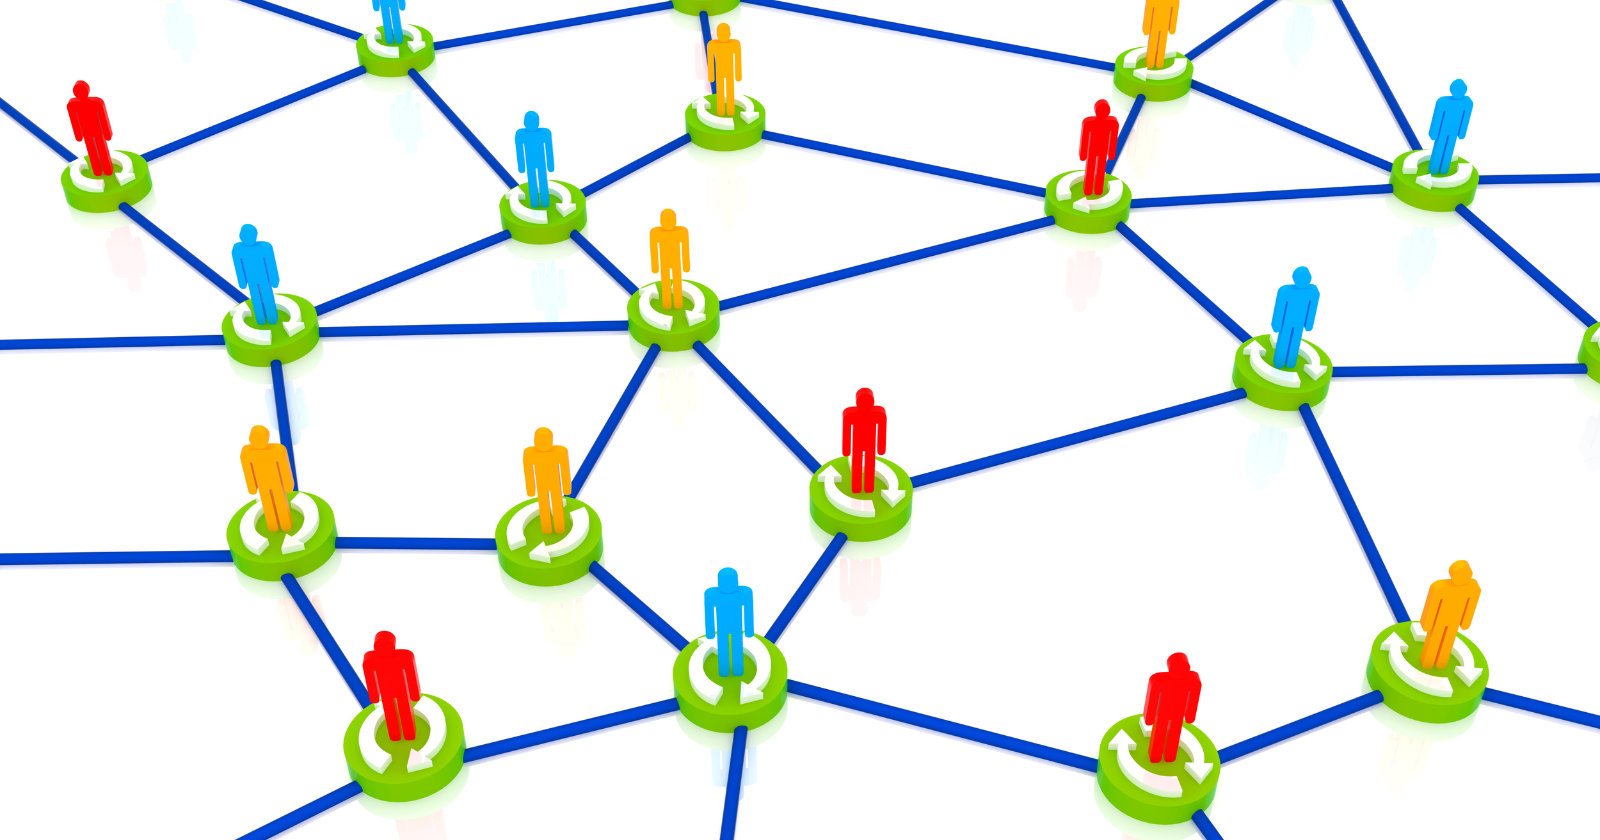 Network of connected people icons